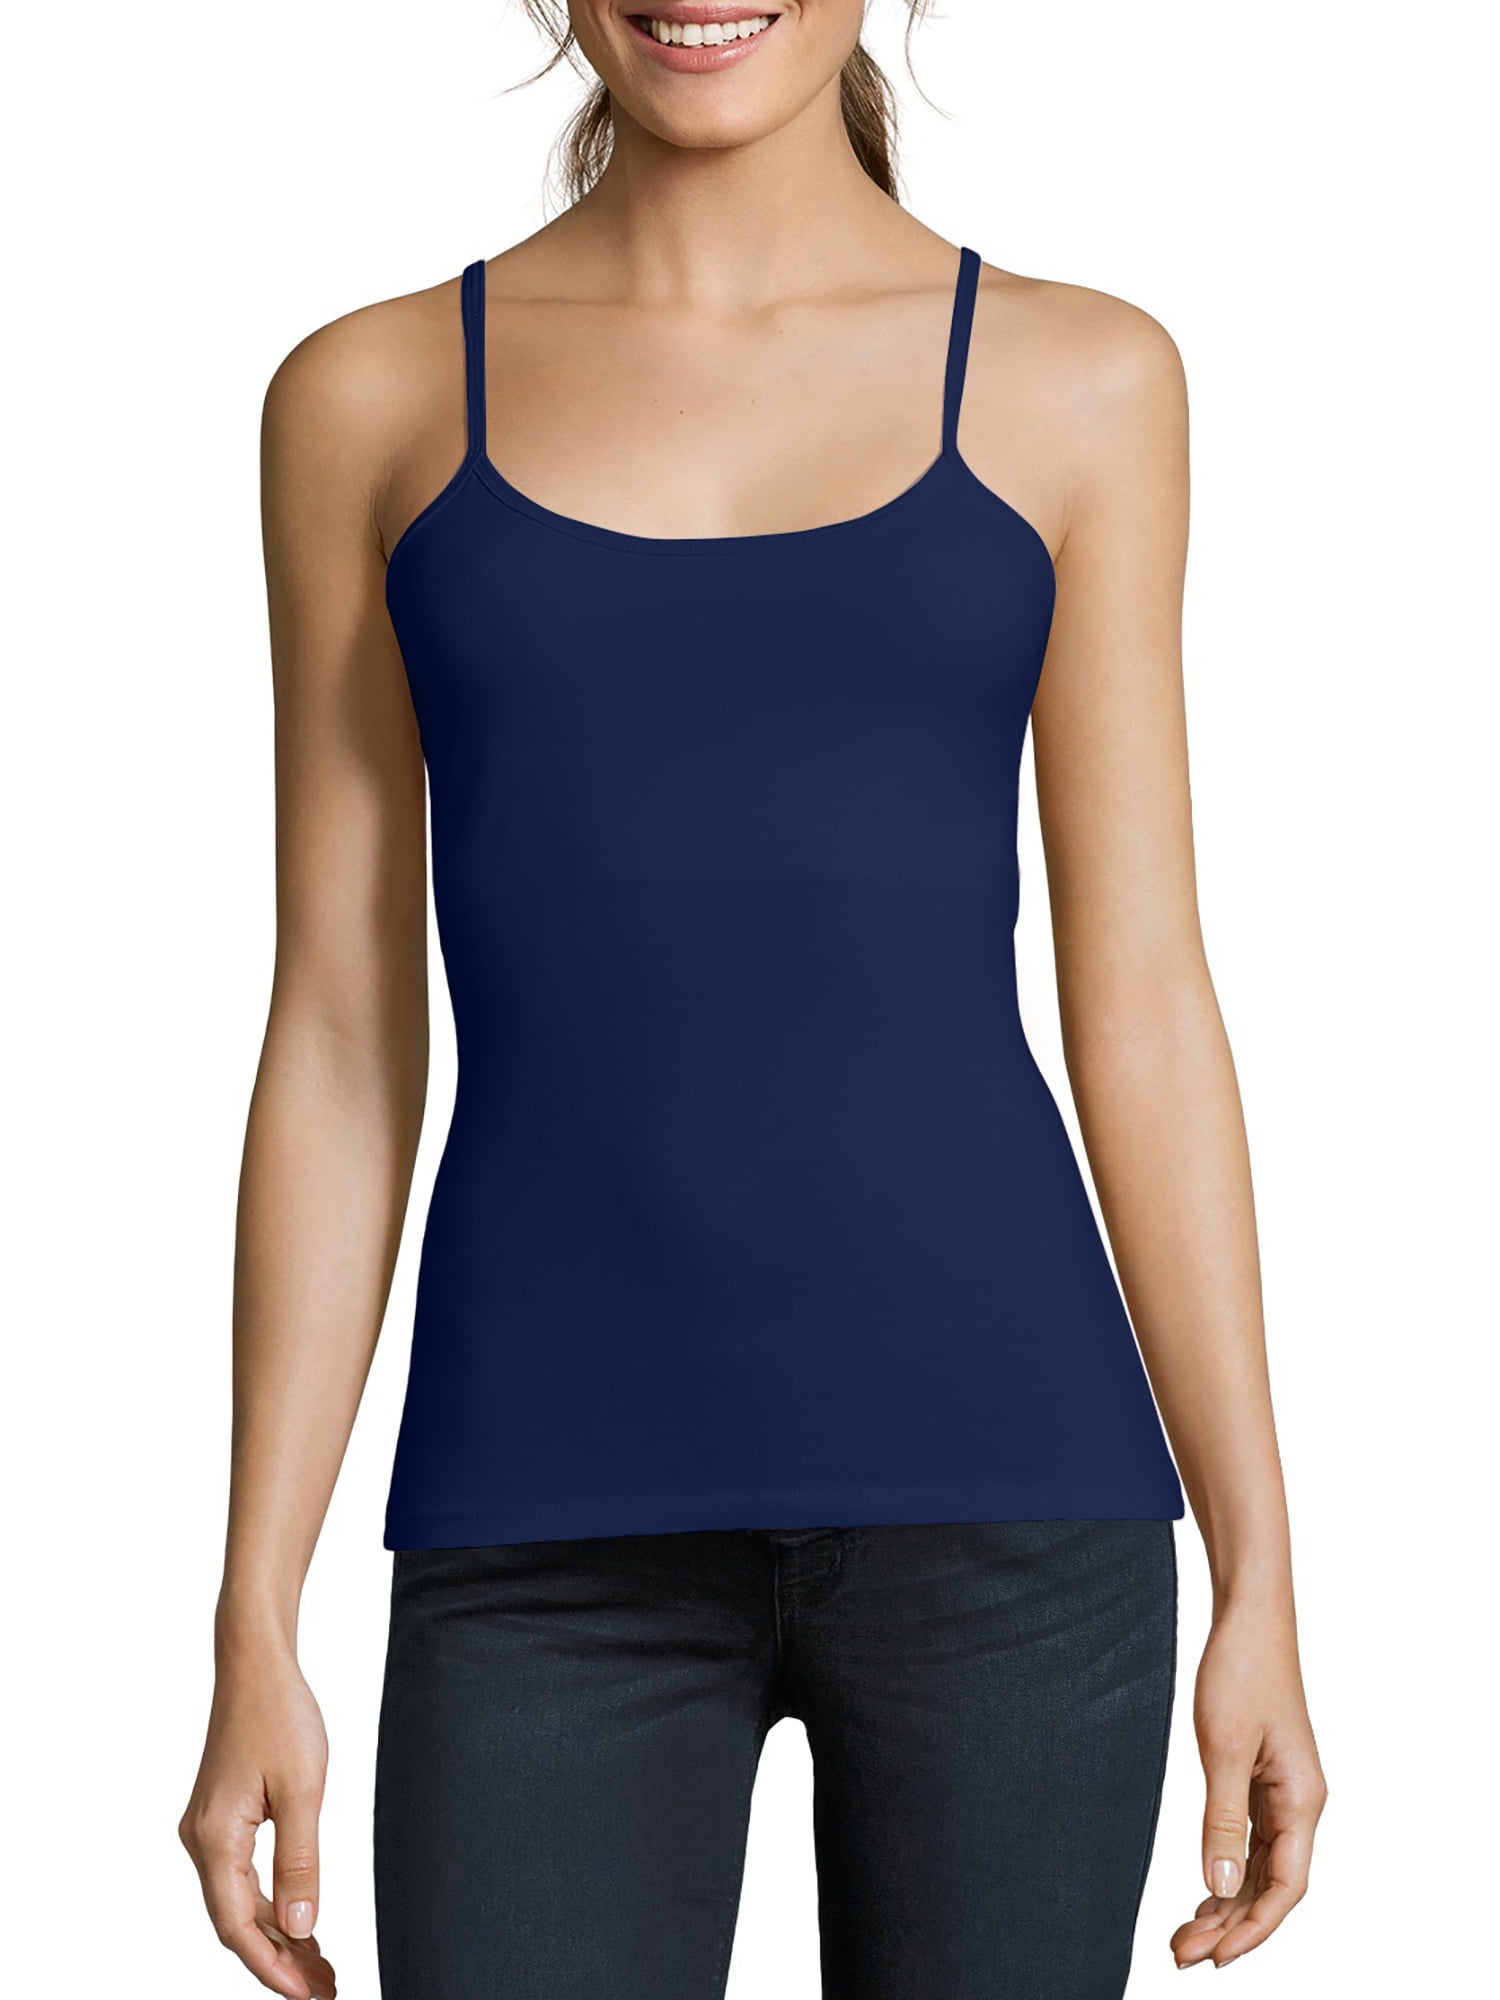 Women Cotton Camisole with Shelf Bra Camisole Tops with Built in